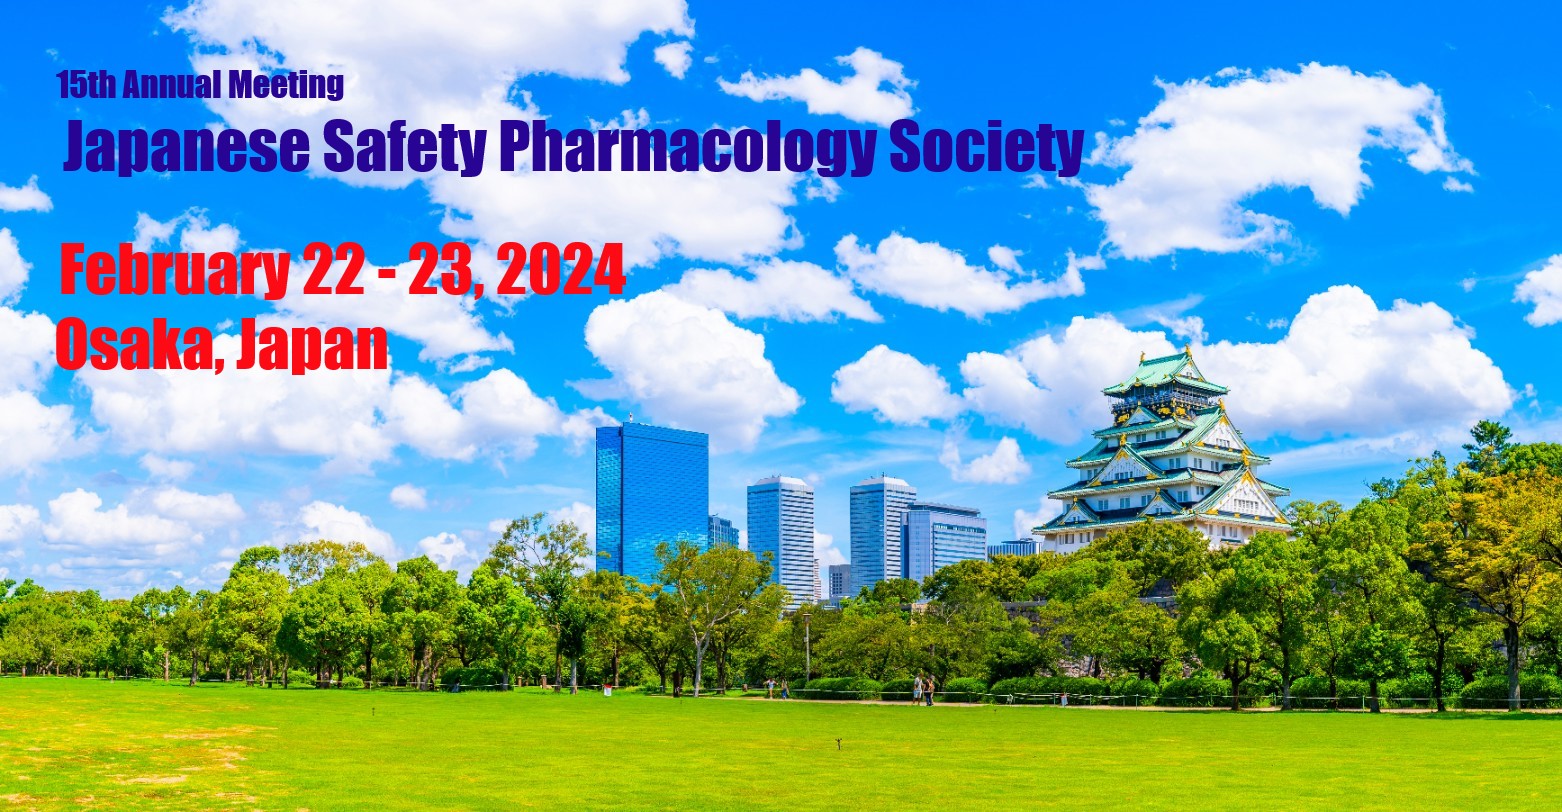 Highlights of the 15th Annual Meeting of JSPS  (updated as of Dec. 18, 2023)